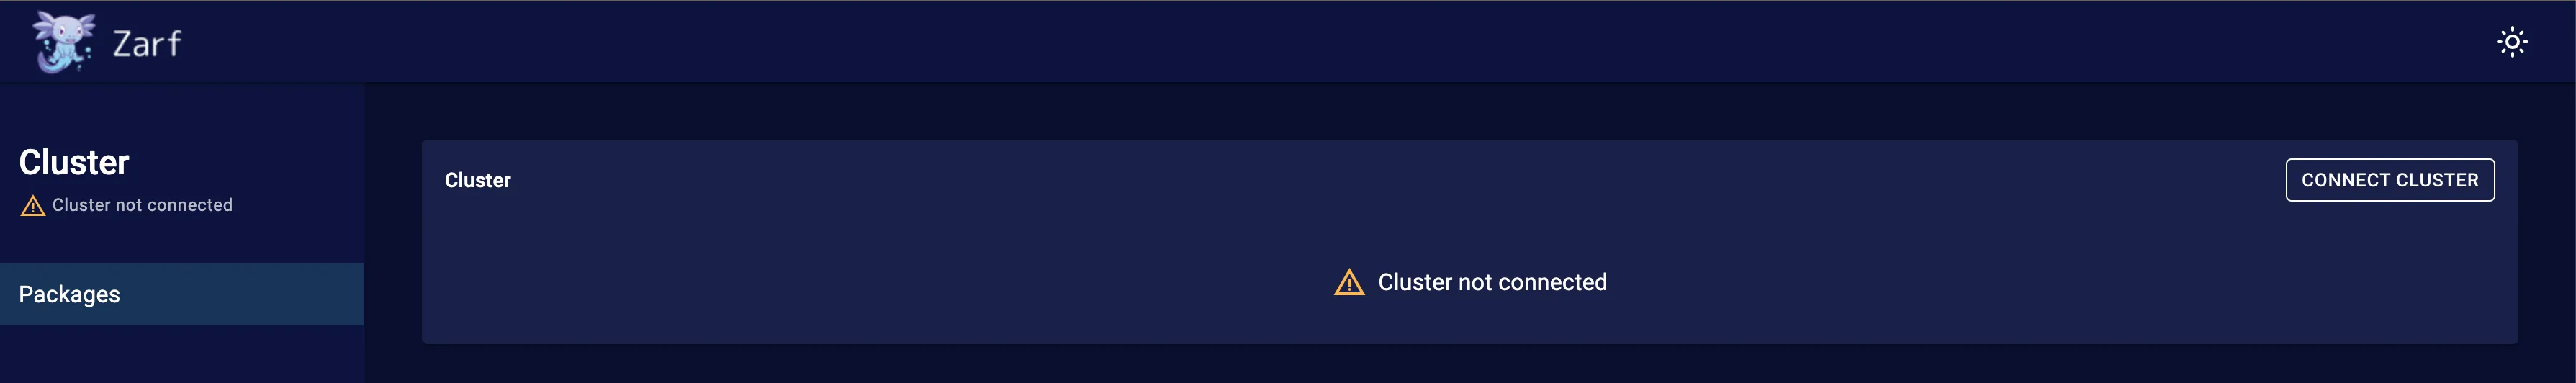 Web UI shows orange warning status and message "cluster not connected" on the cluster card